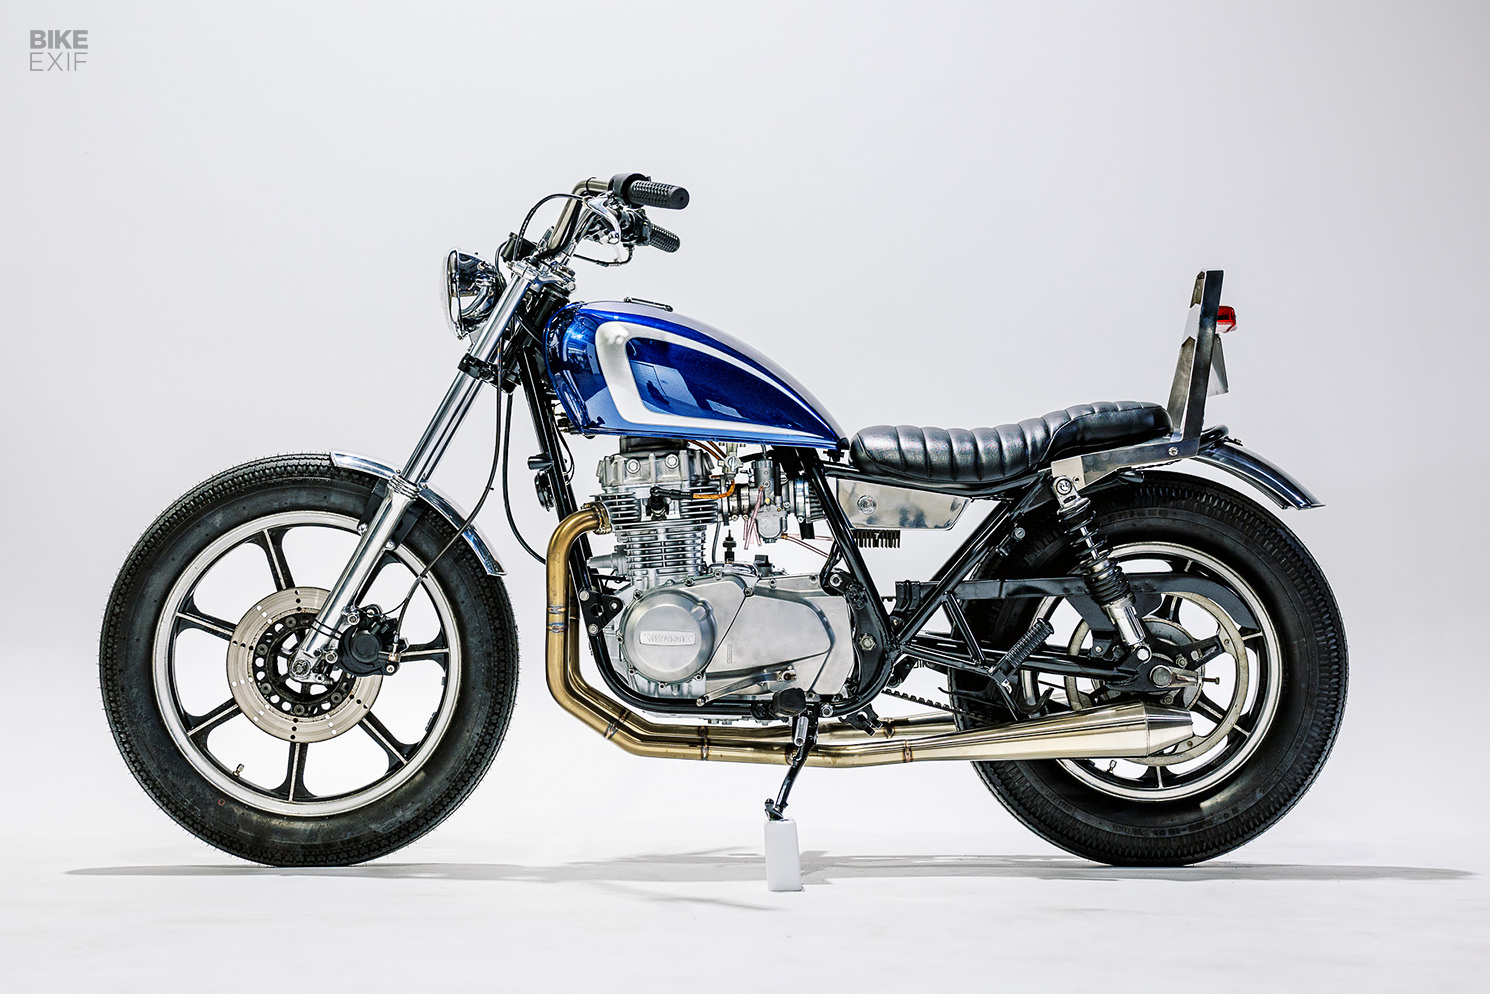 The Pathfinder: This BMW boxer scrambler is Crooked's 50th custom